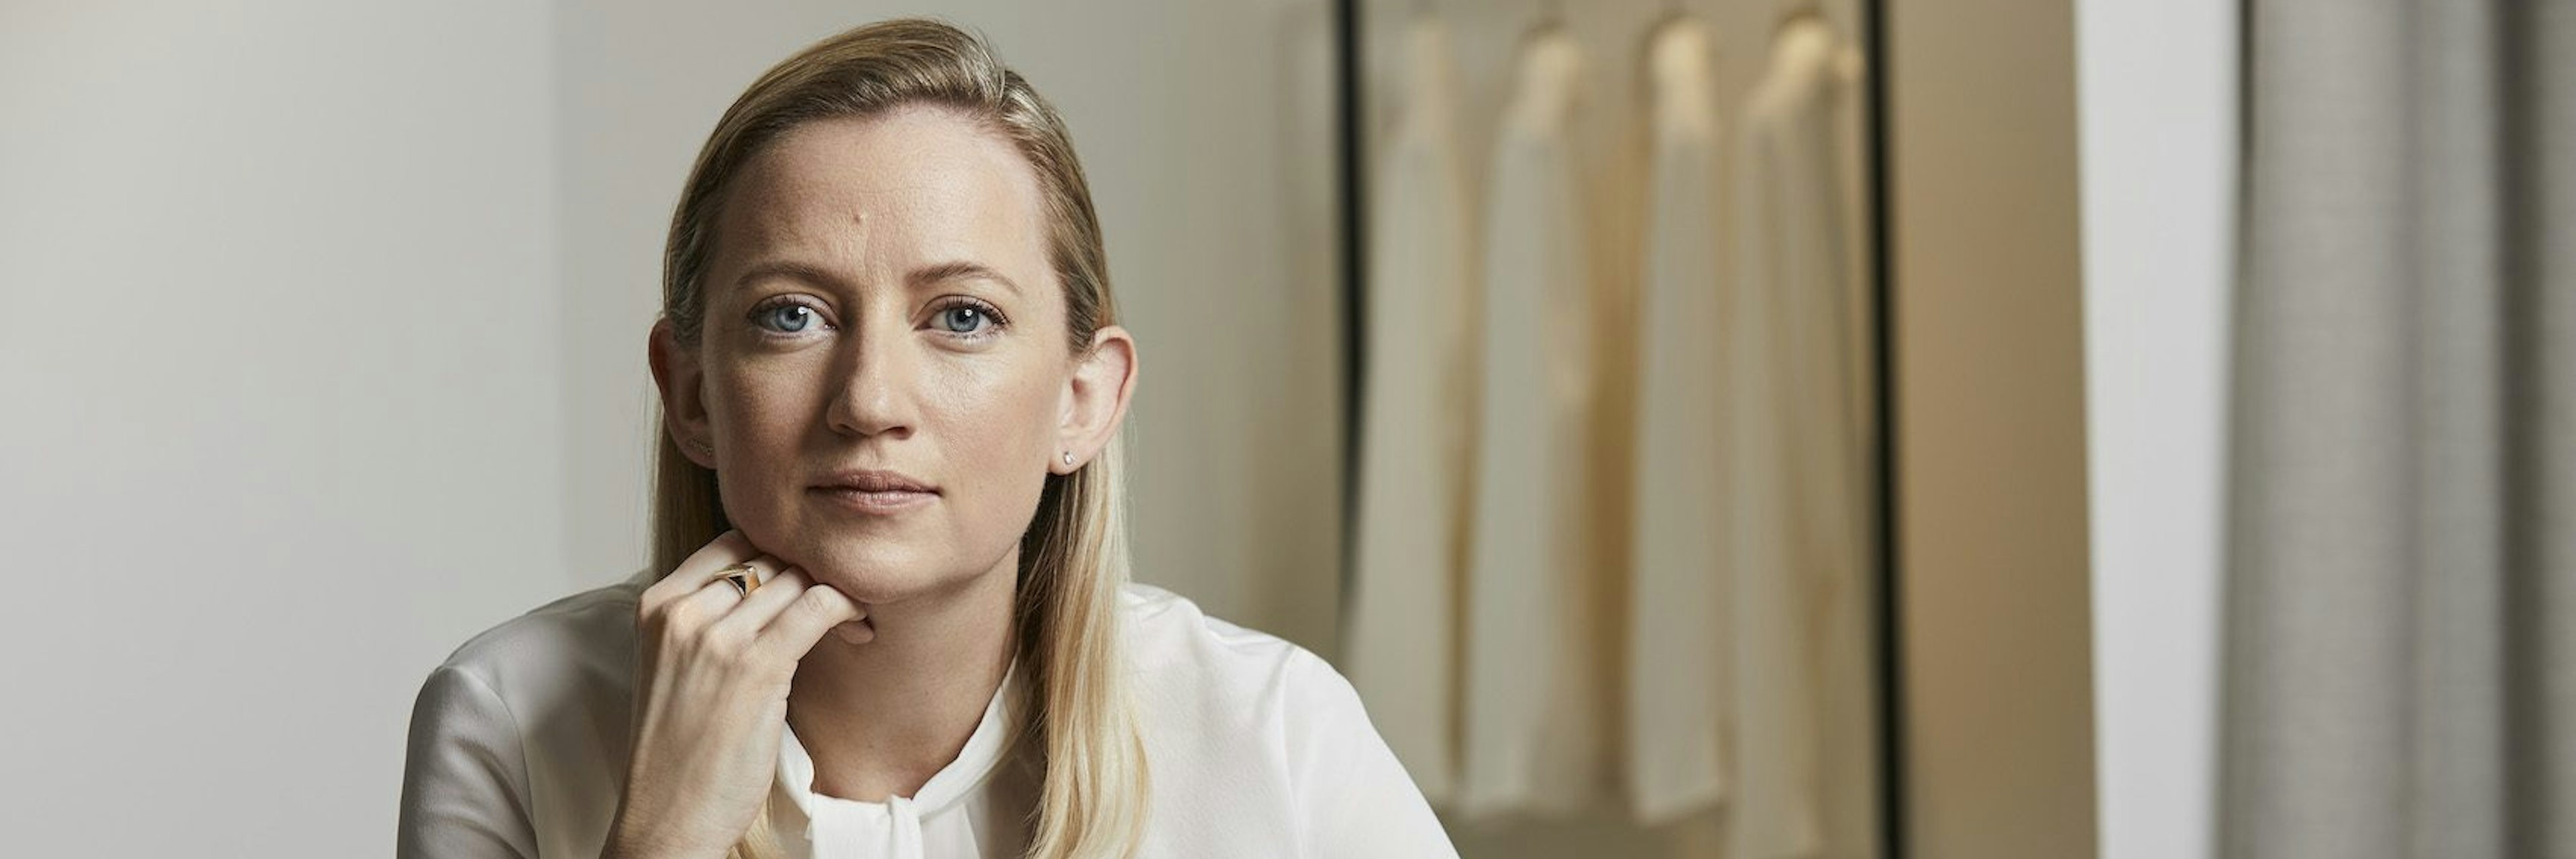 Polly McMaster, founder and CEO of womenswear brand The Fold